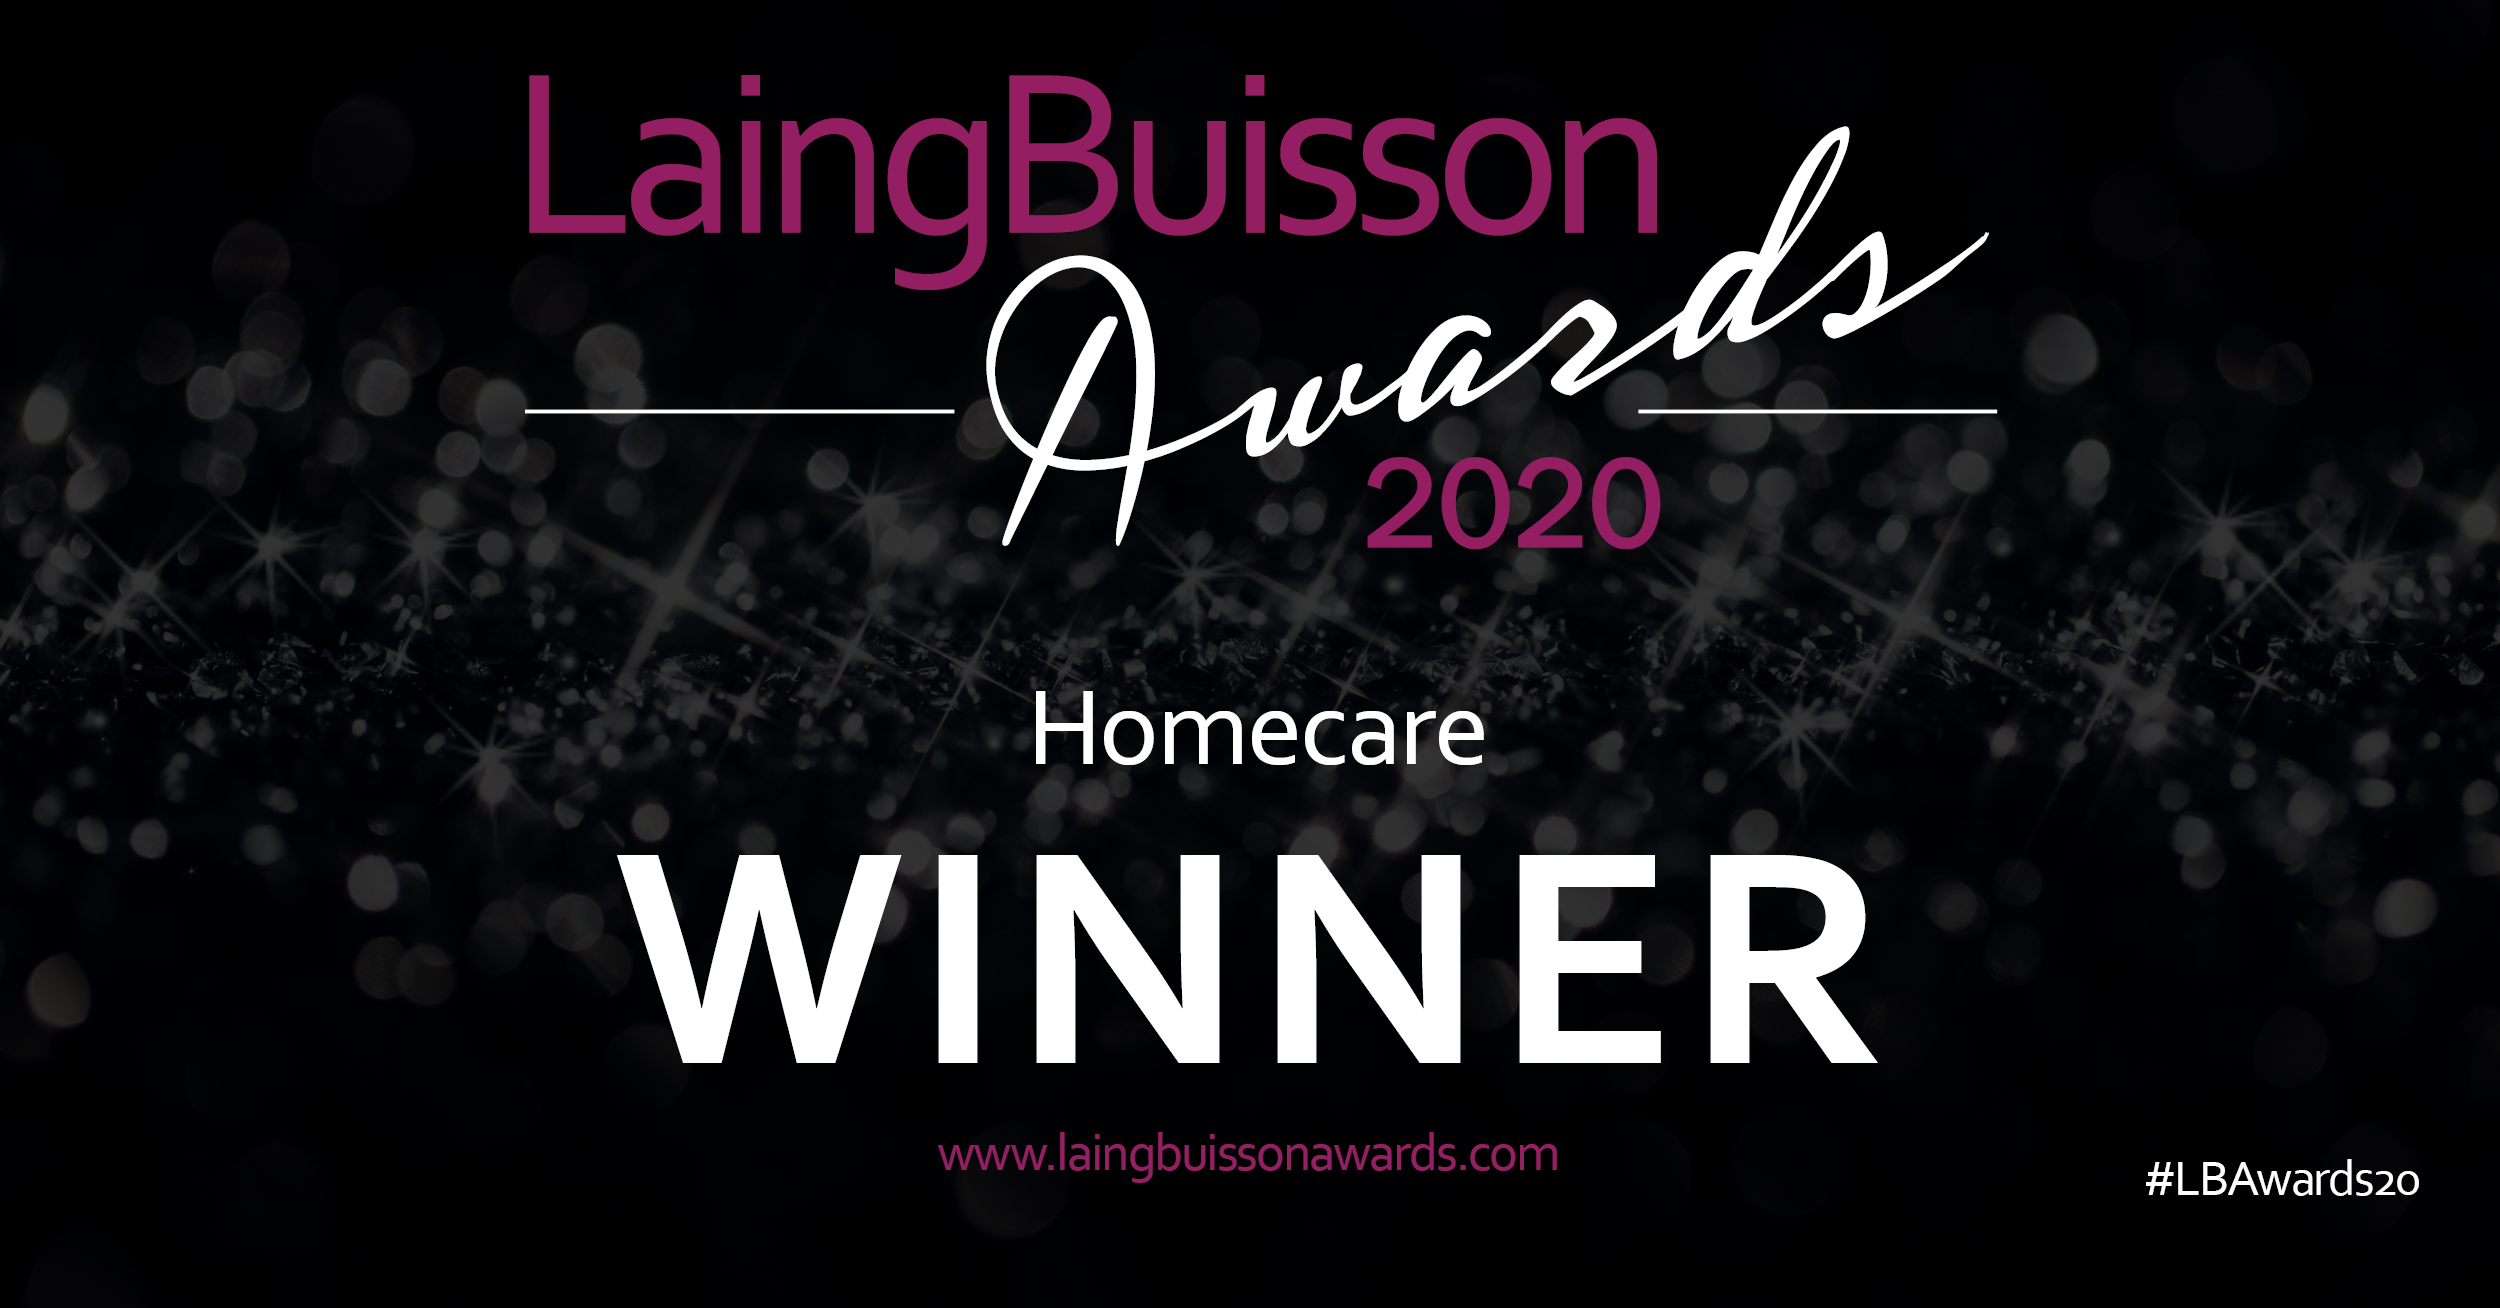 Winners at the LaingBuisson Awards 2020